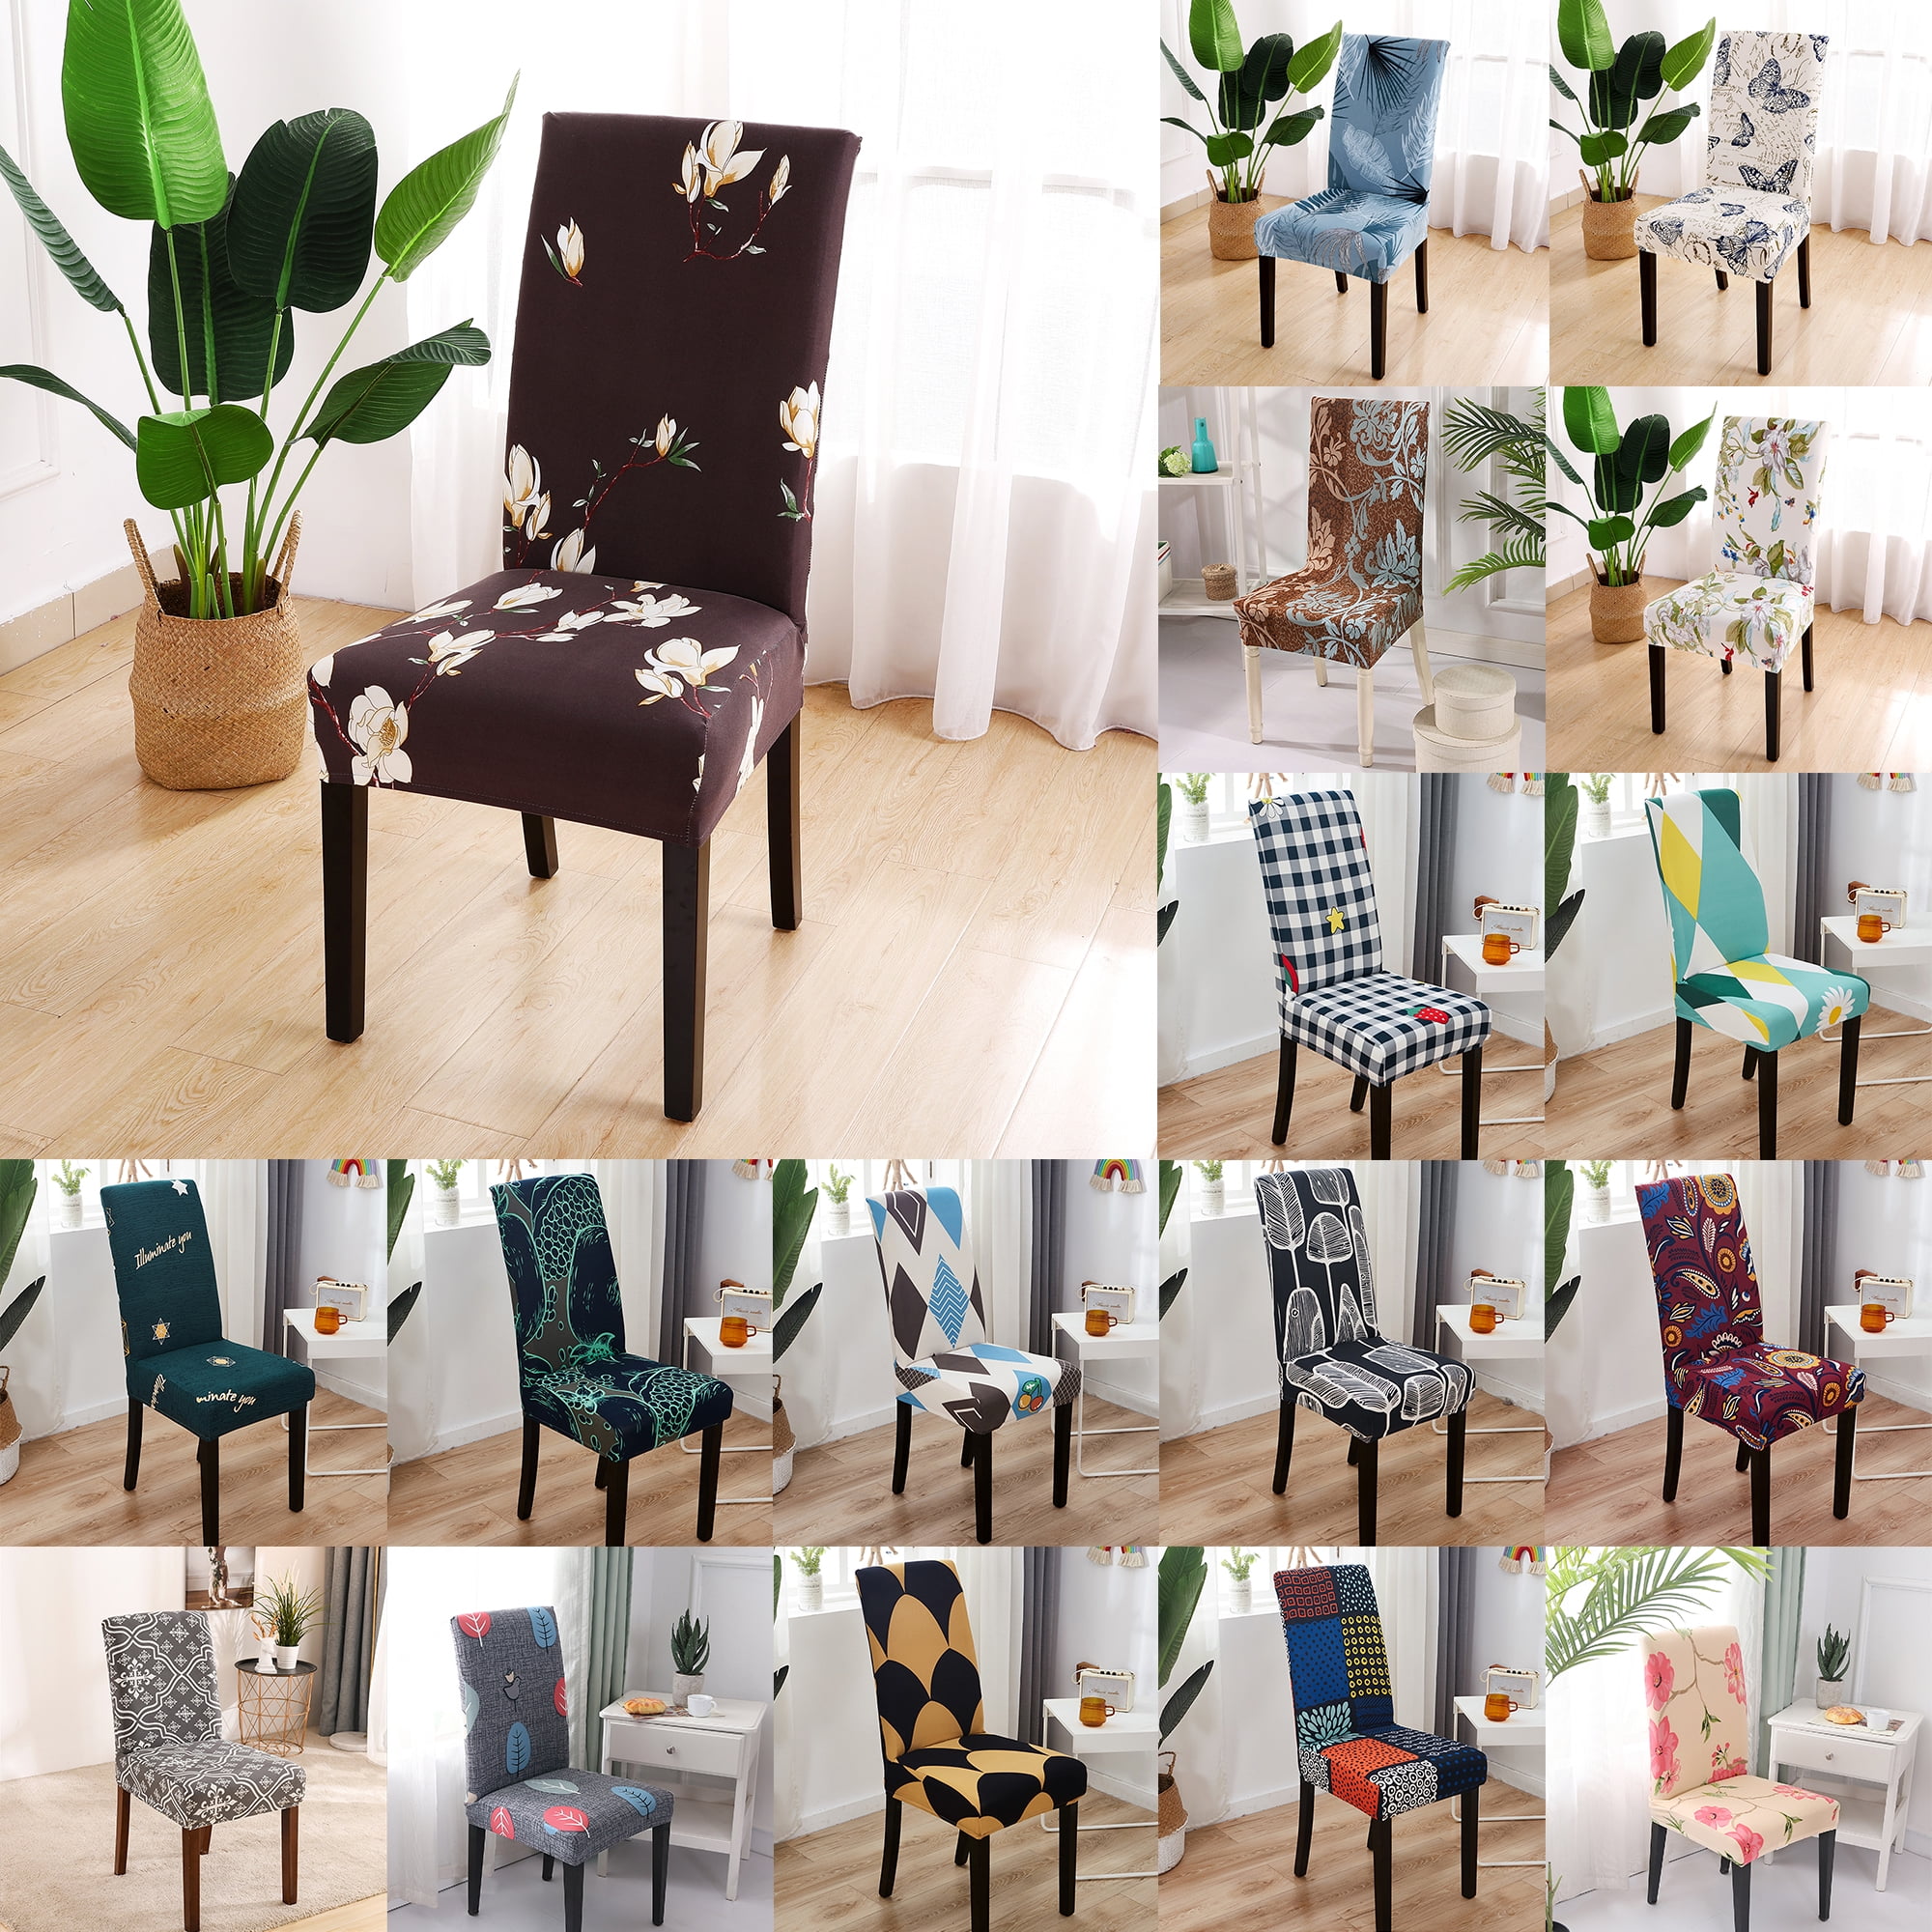 Details about   Stretch Dining Chair Covers Slipcovers Wedding Banquet Decor Seat Covers Hot 